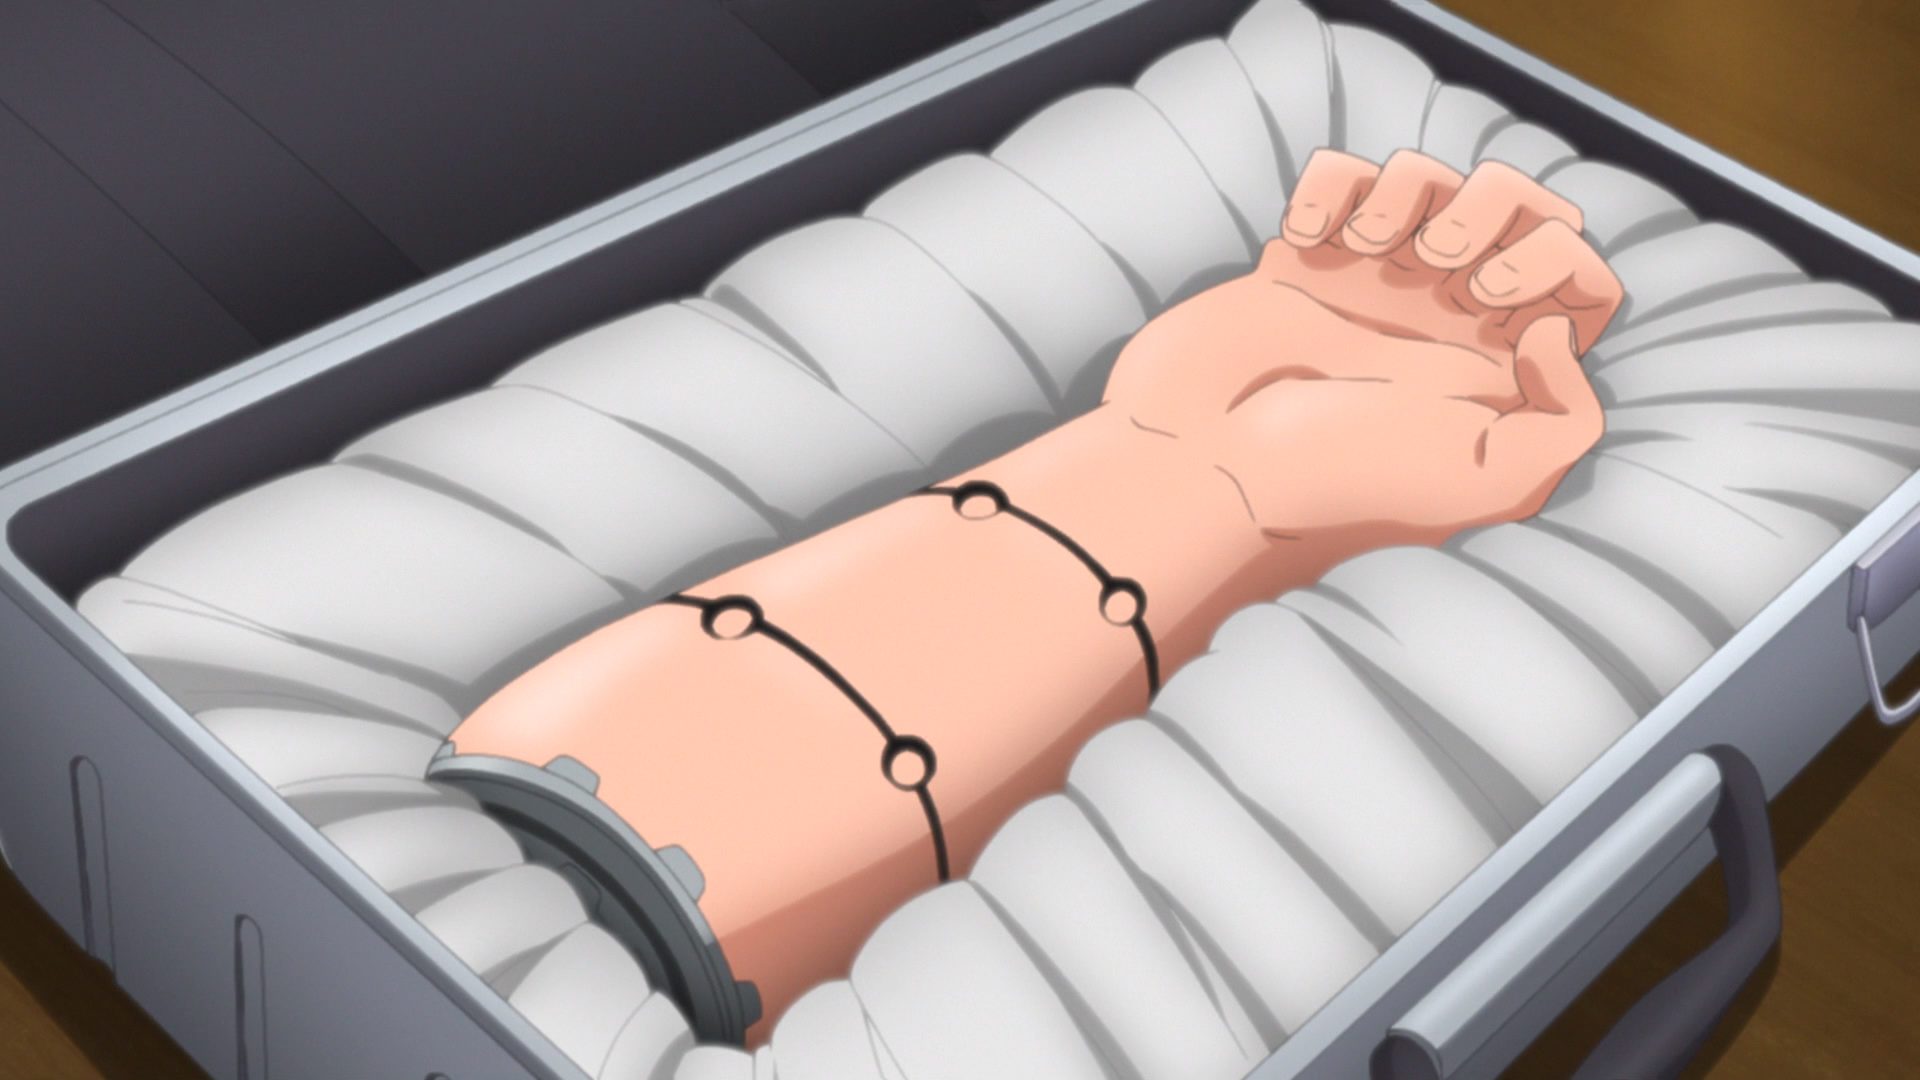 Naruto%27s_Absorbing_Hand.png